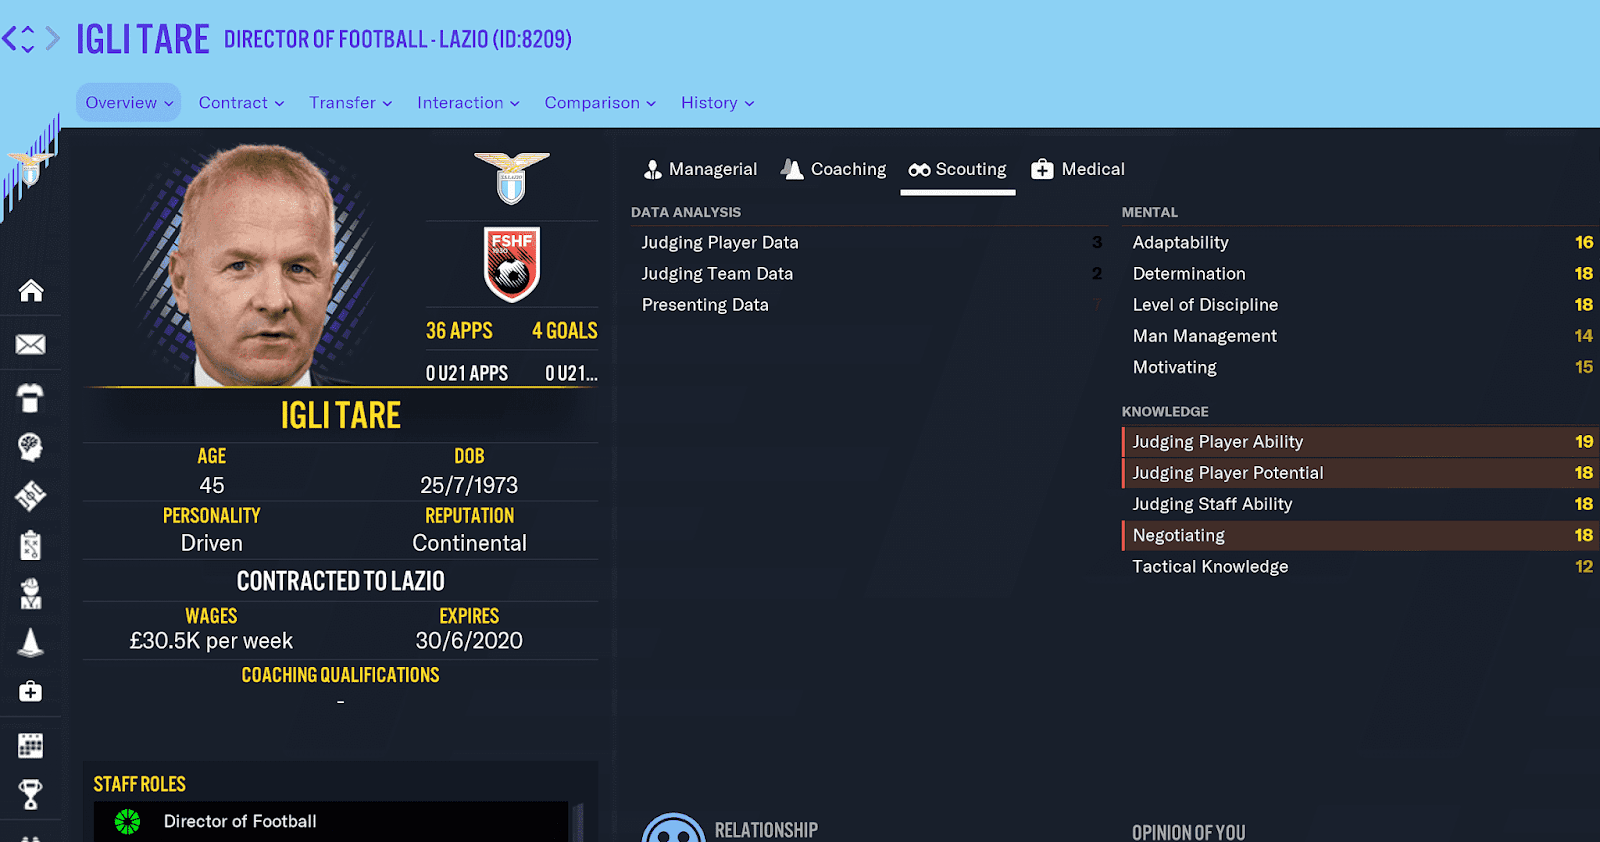 Finding the best Director of Football in Football Manager